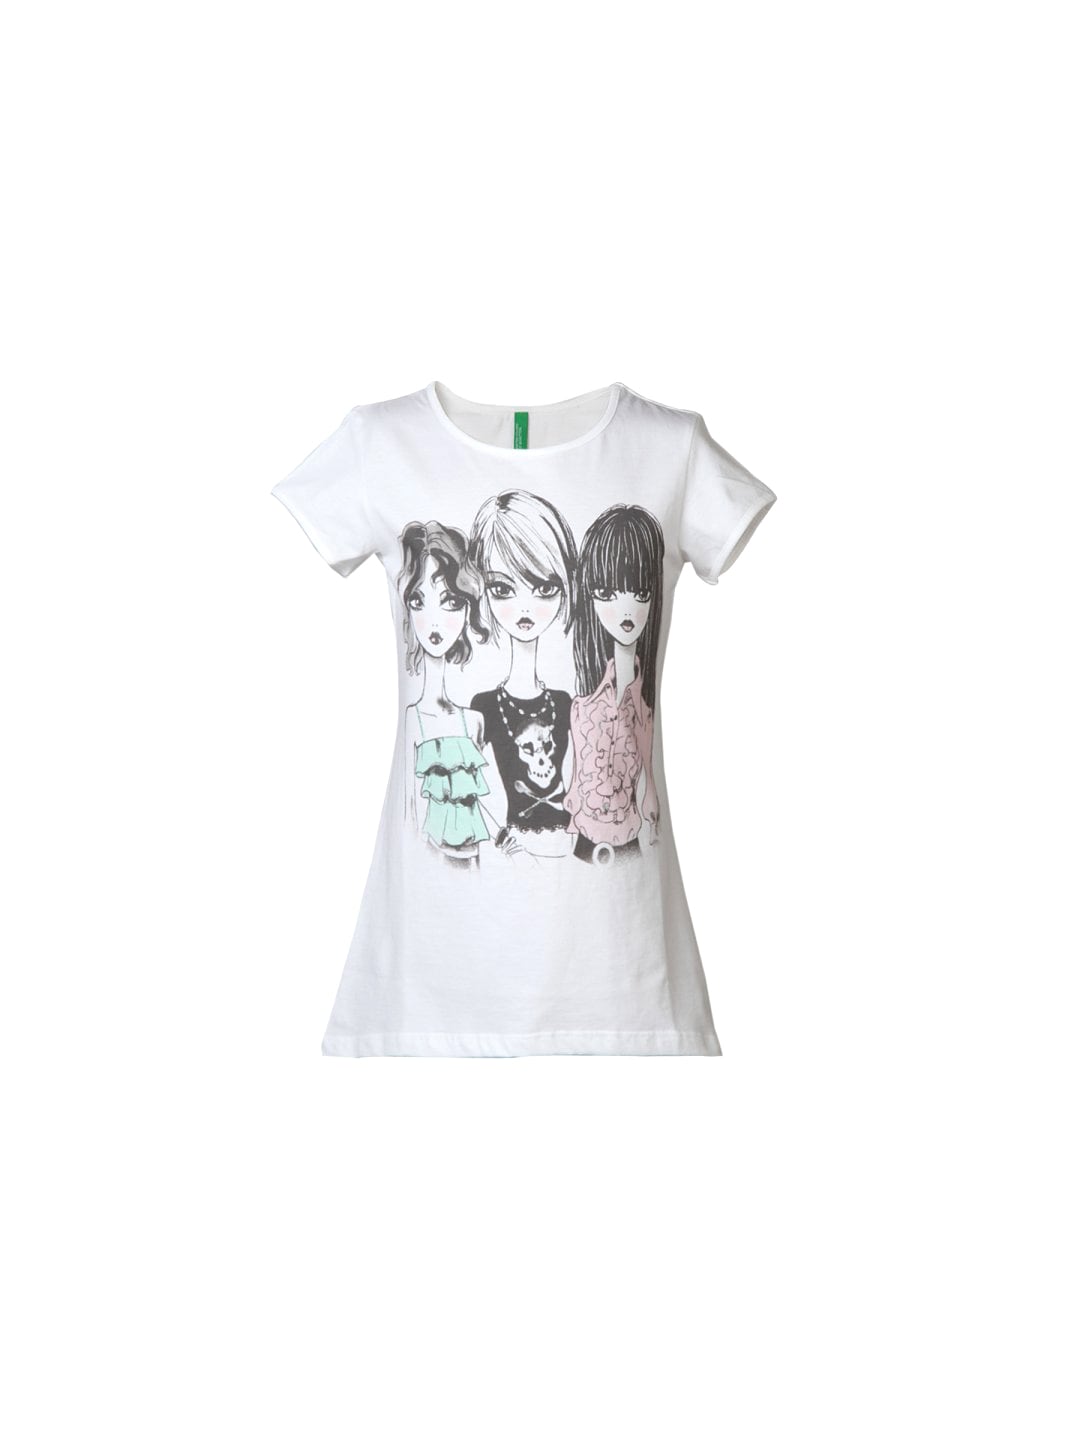 United Colors of Benetton Kids Girls White Top